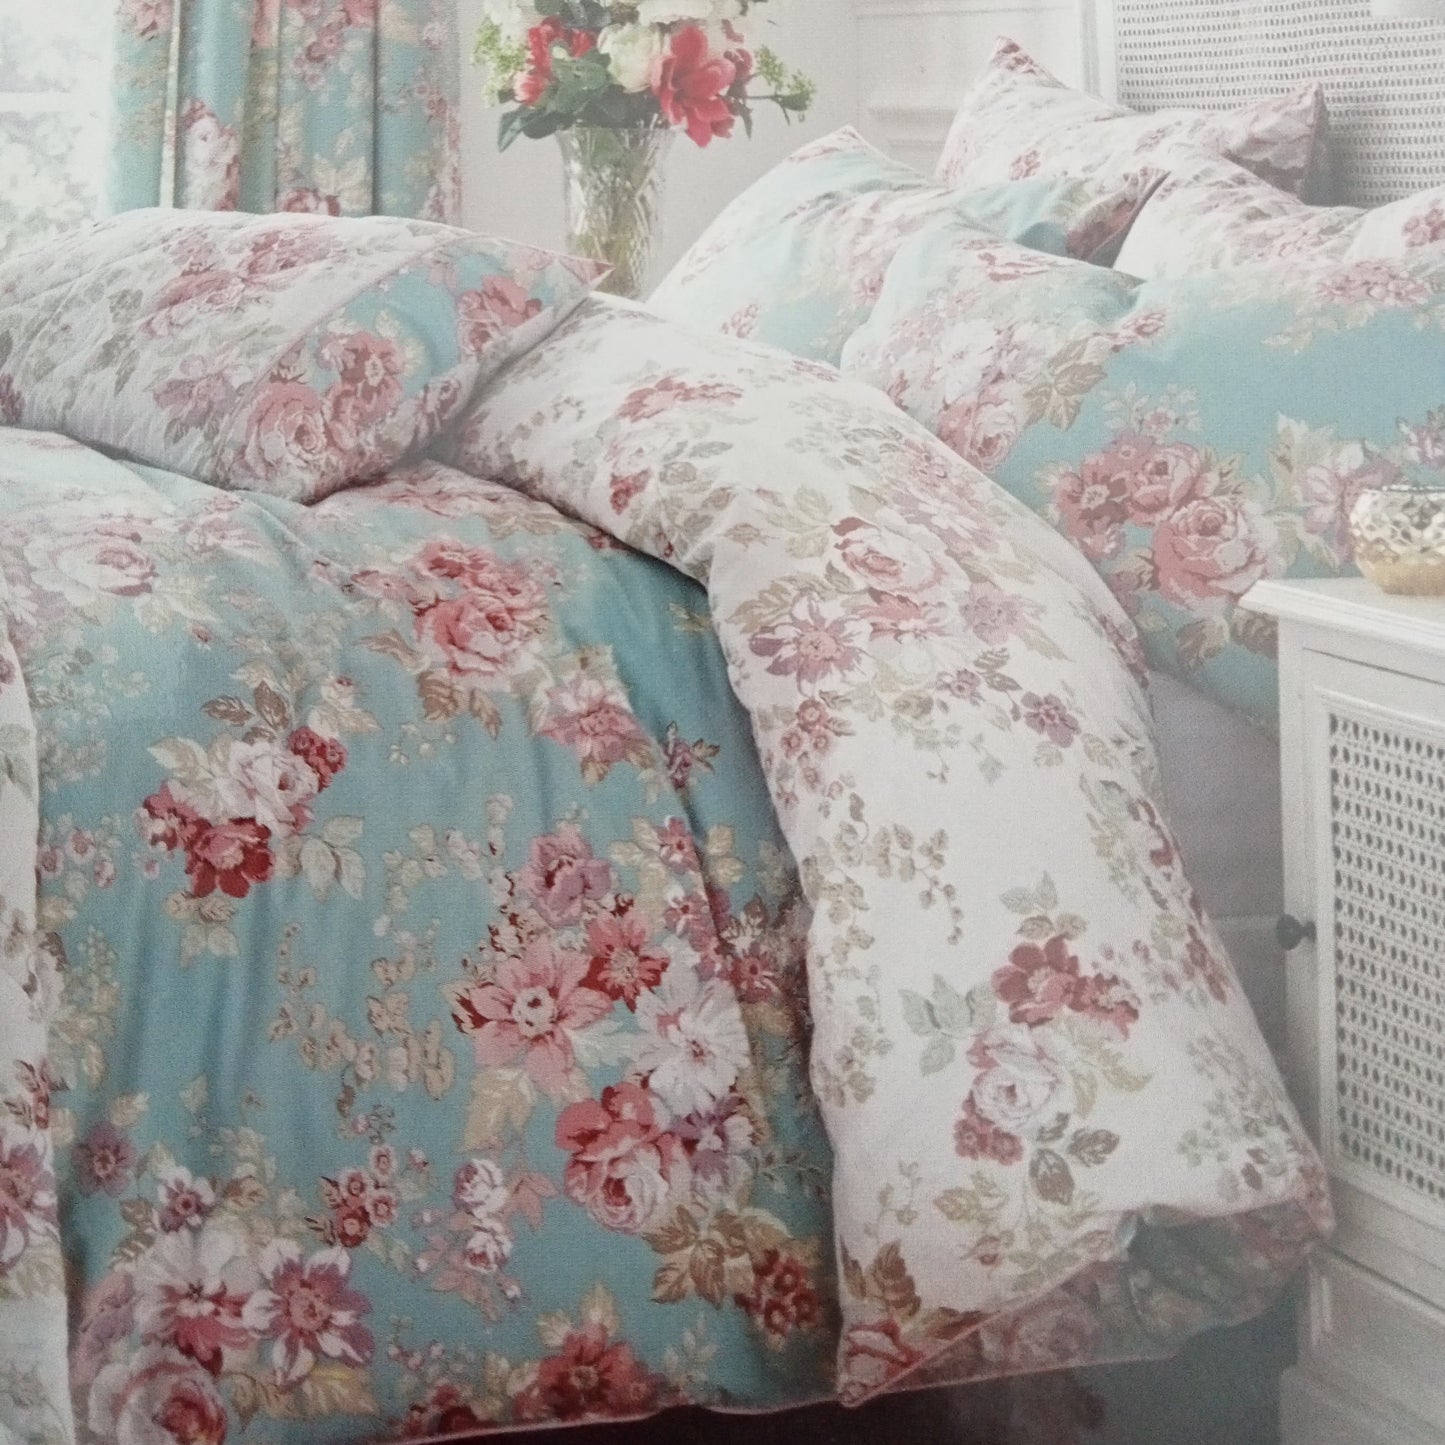 Country Floral Duvet Set by Dorma